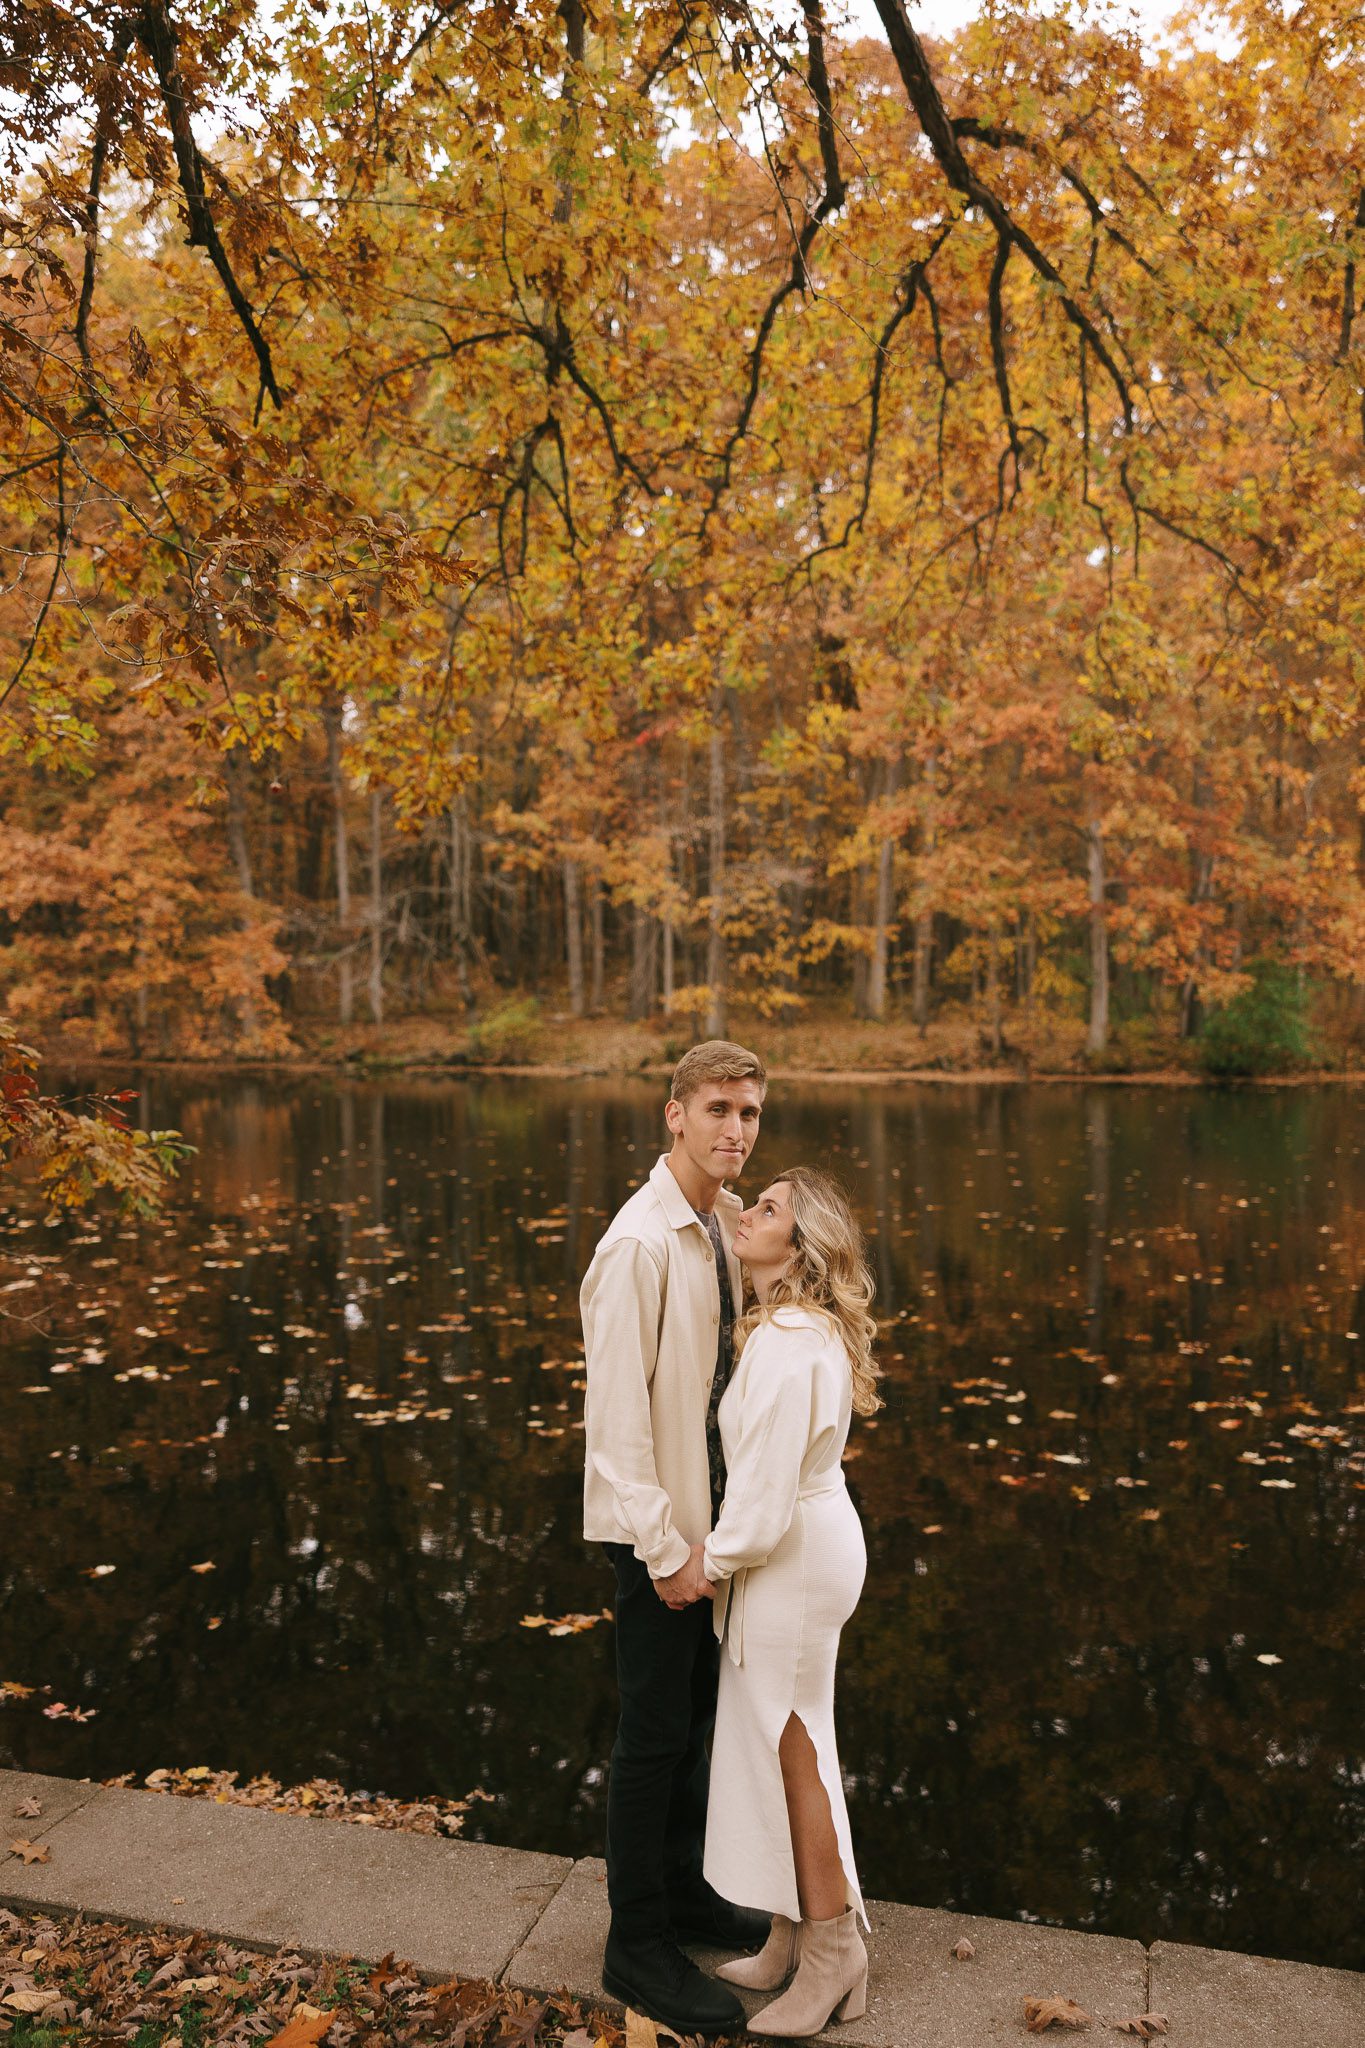 Sophia and Brad embrace by the lake 